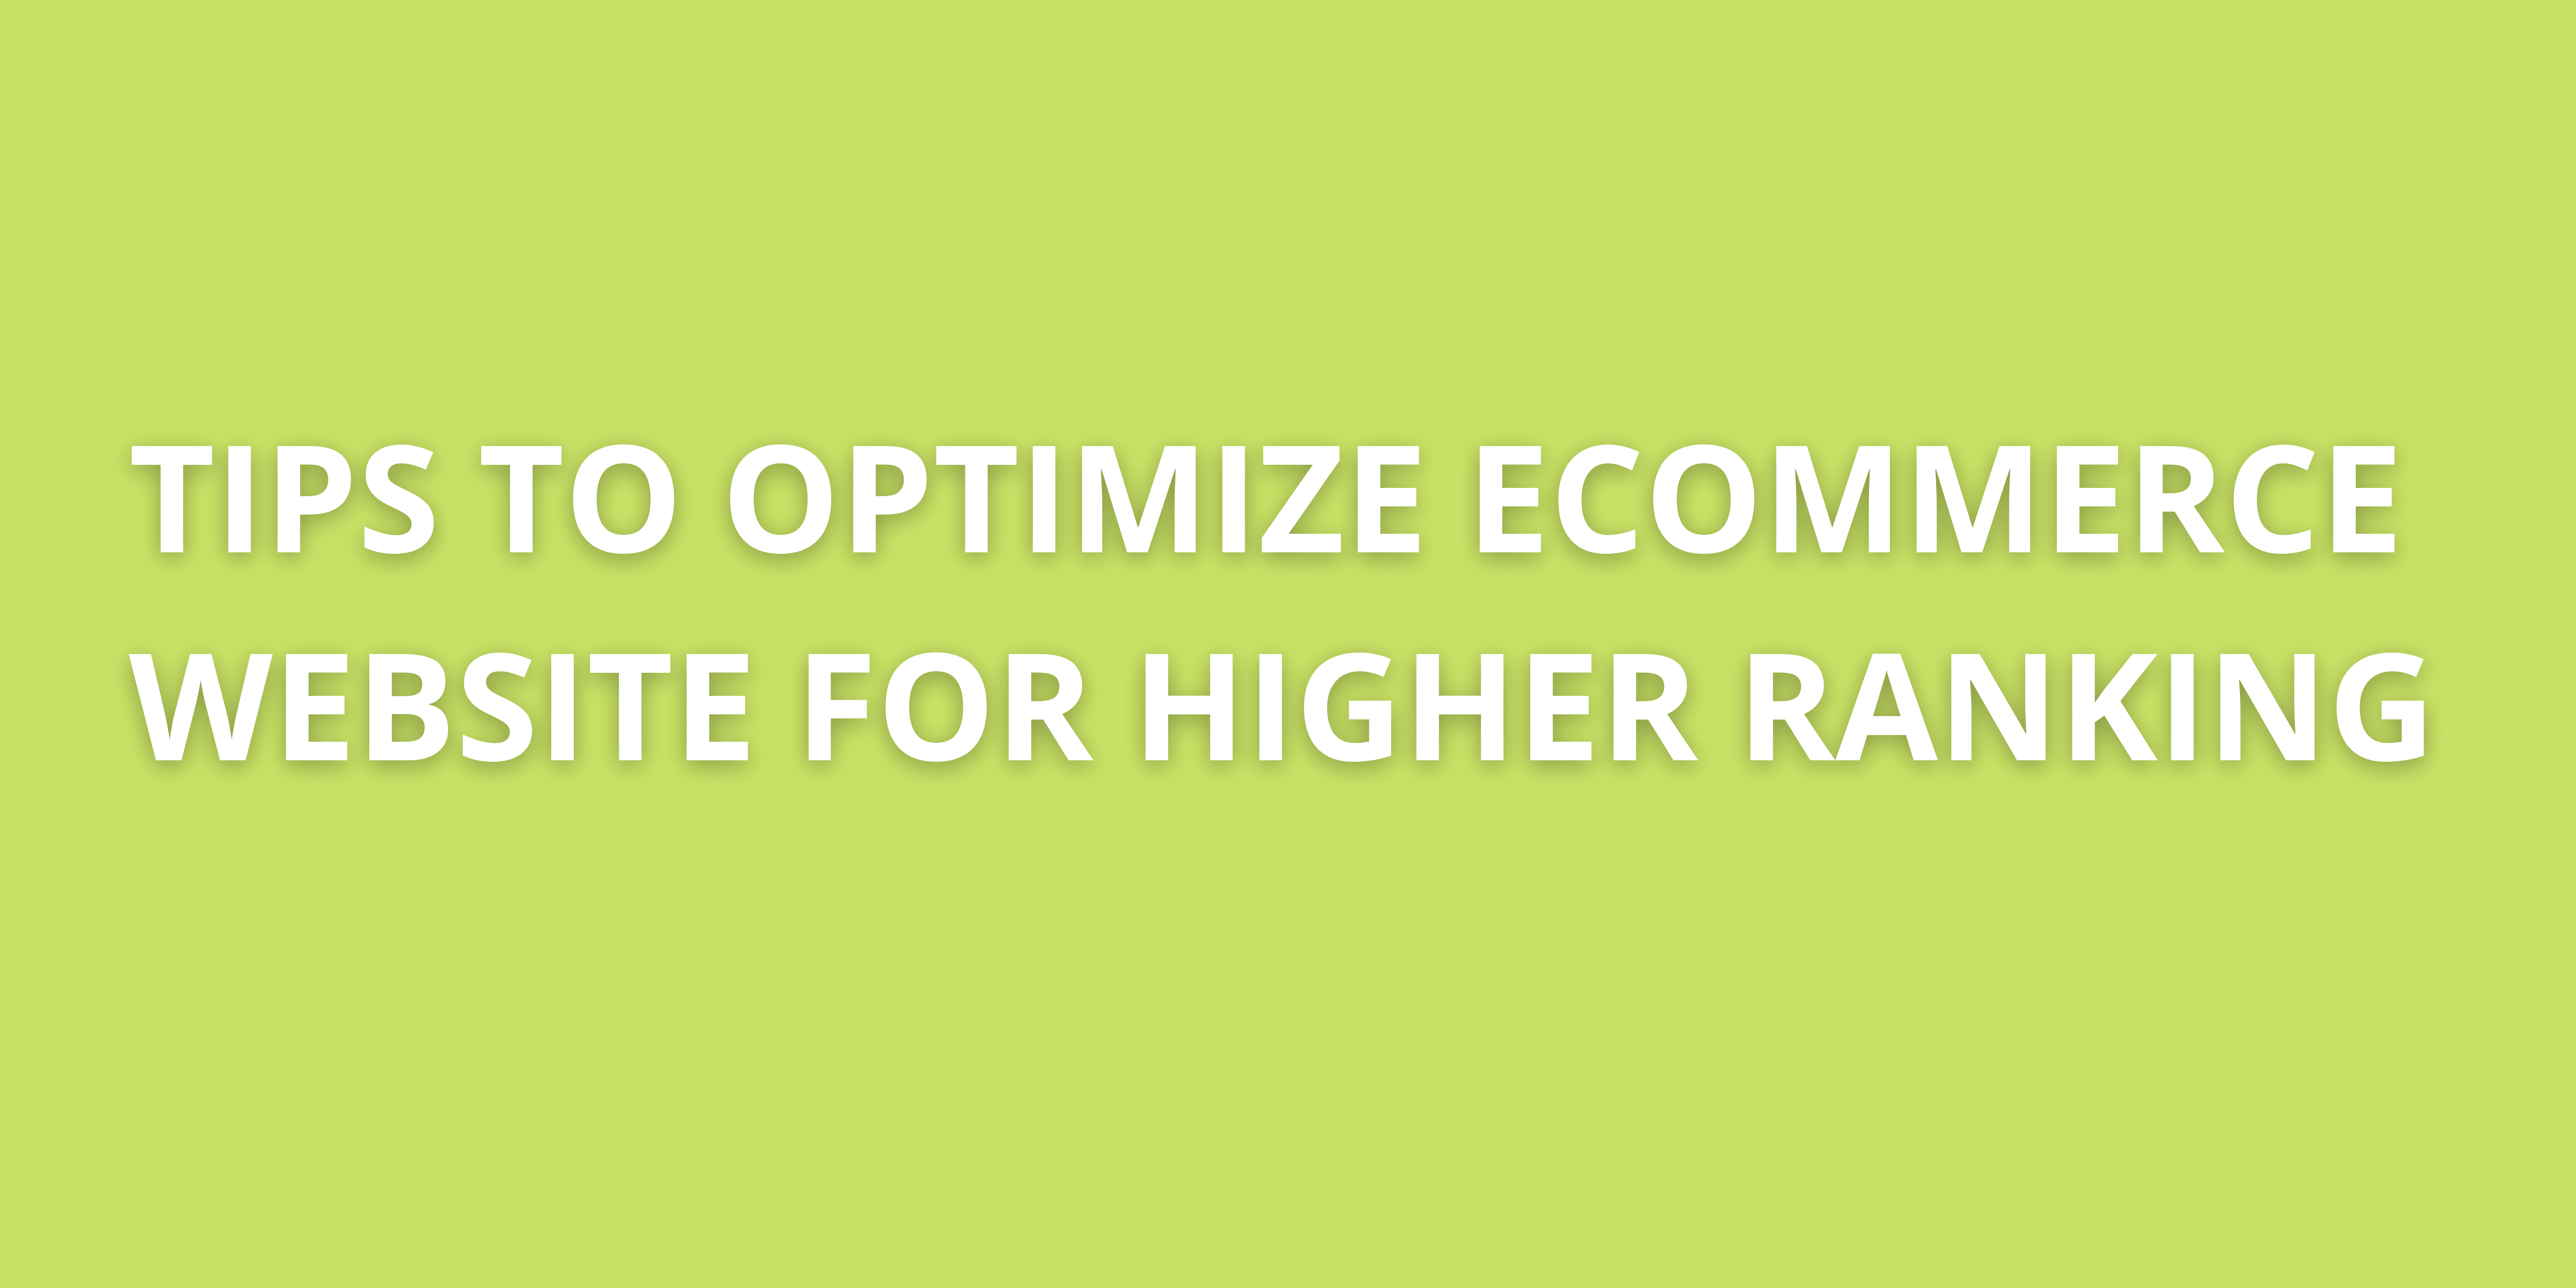 Tips to Optimize Ecommerce Website for Higher Ranking